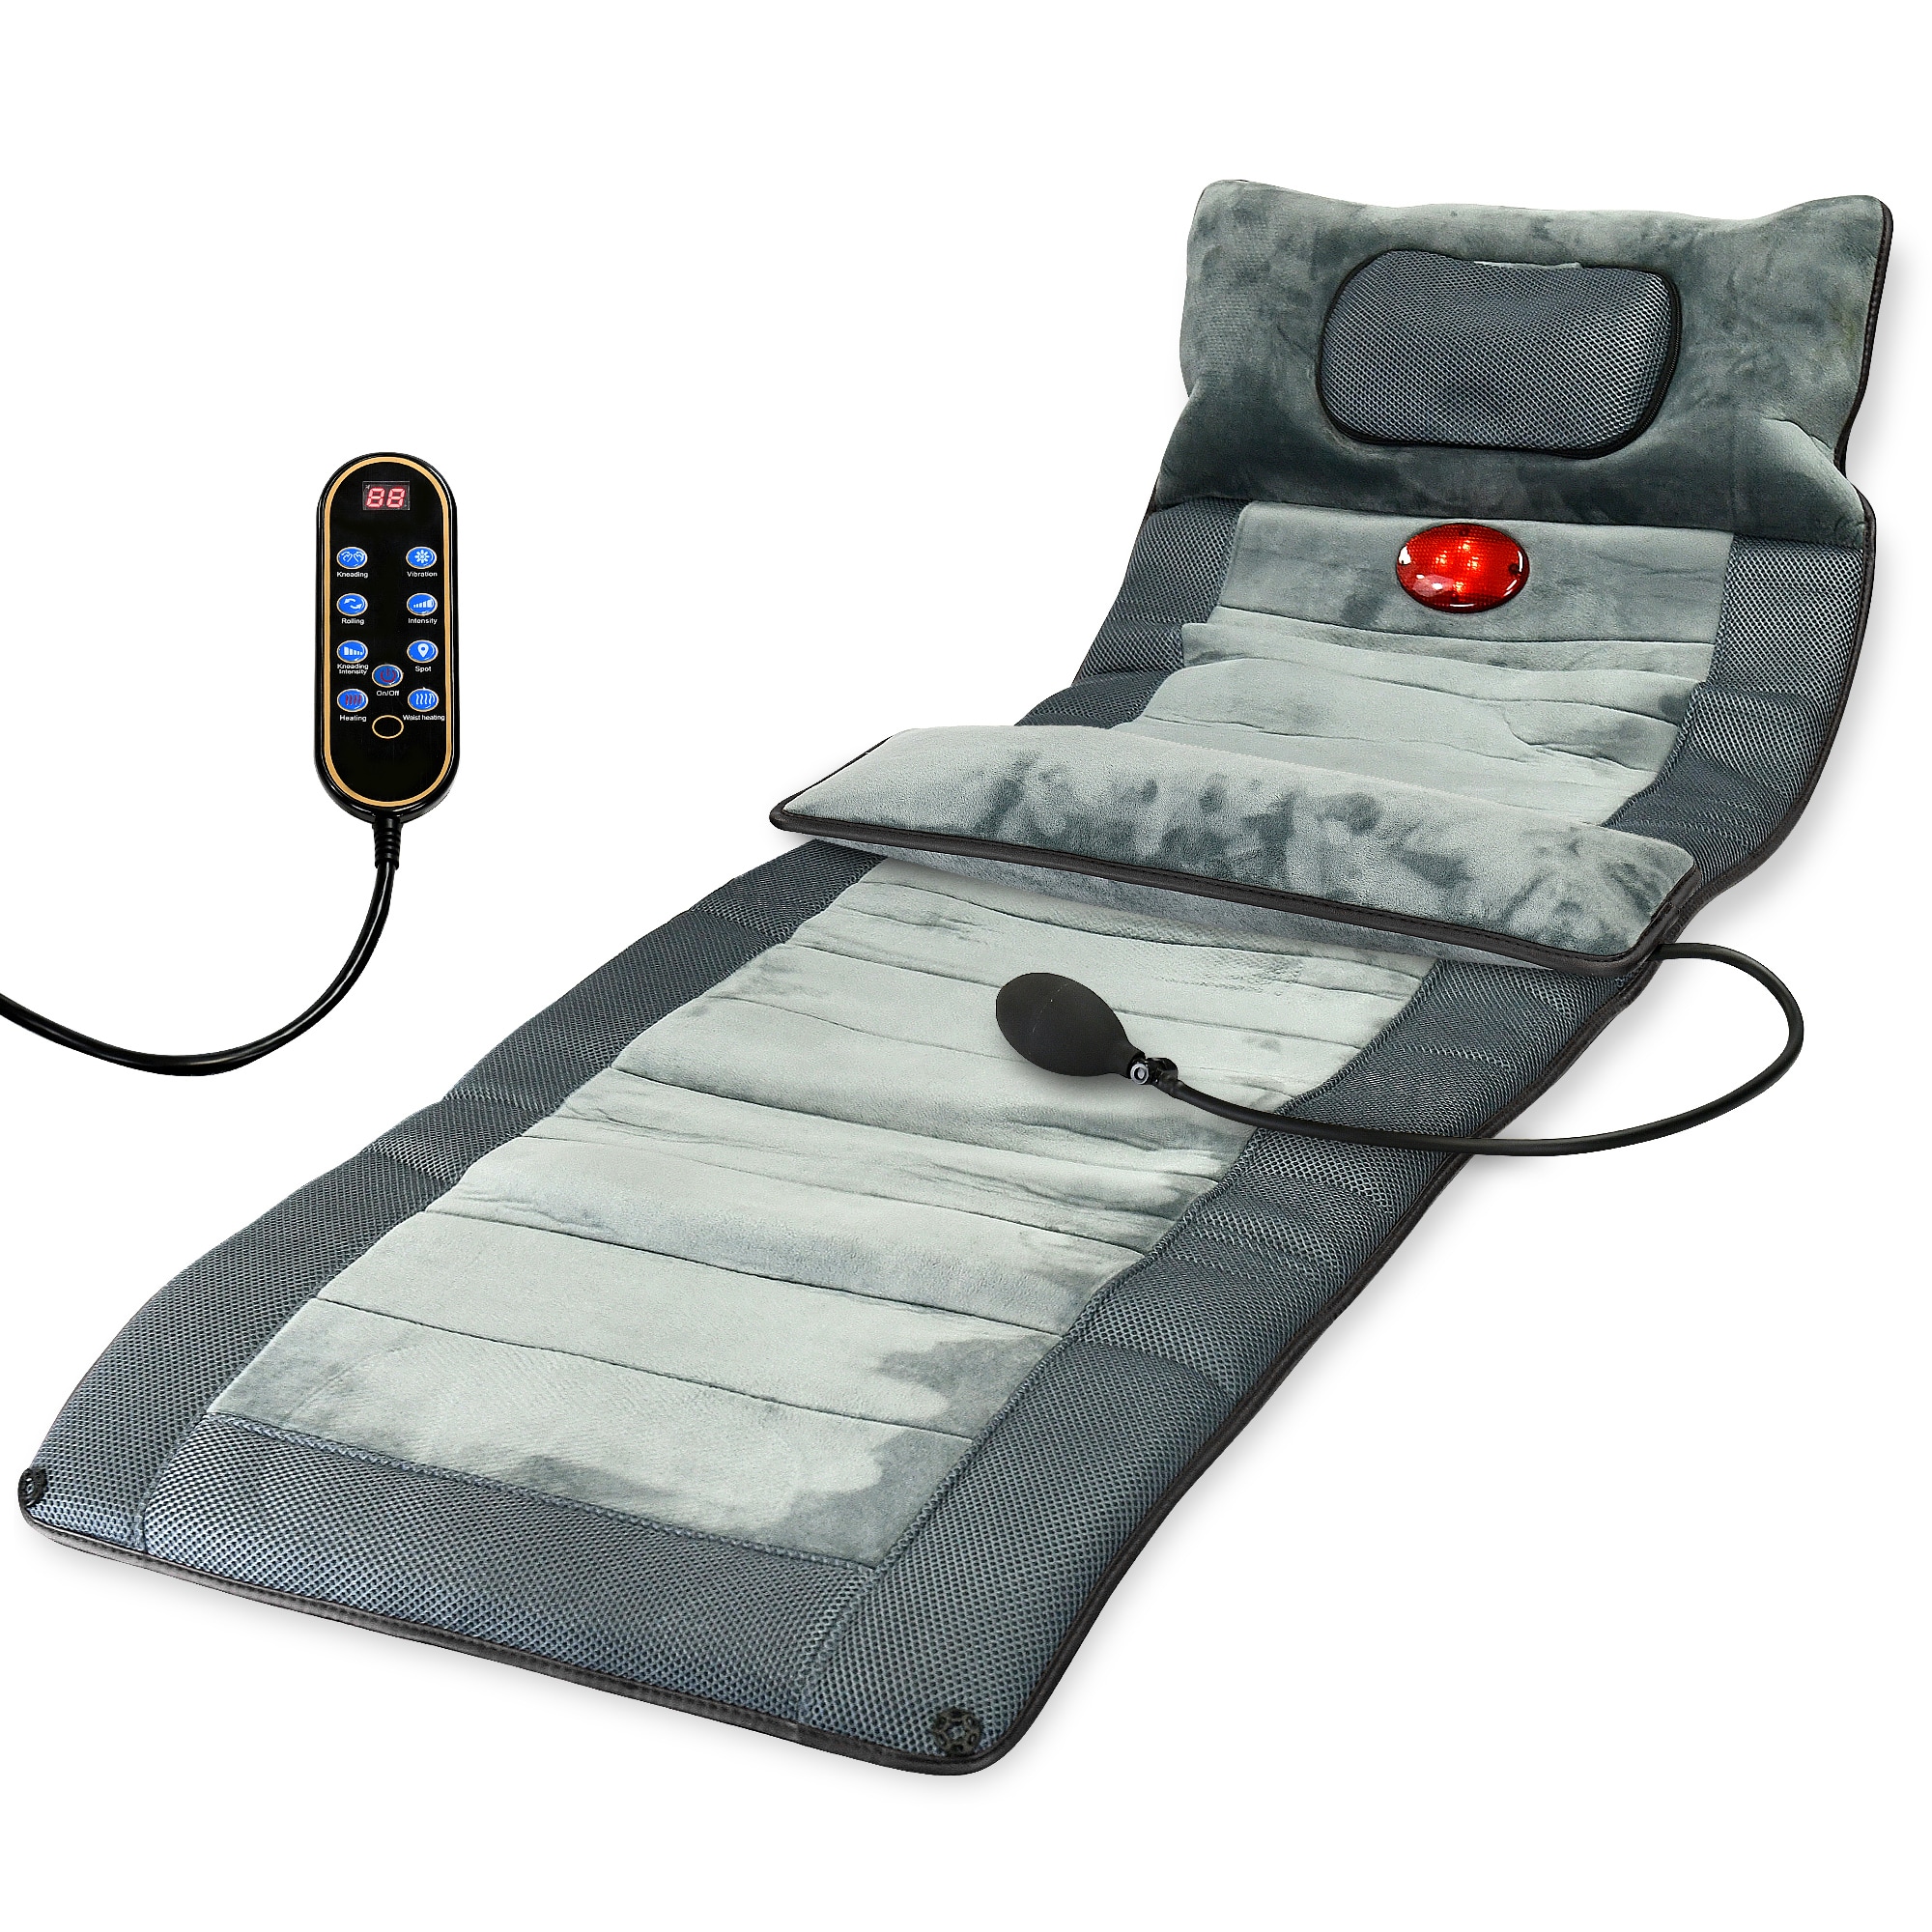 Carepeutic Shiatsu Heated Seat Pad With Vibration Massage For Total Body Relief Gray 3